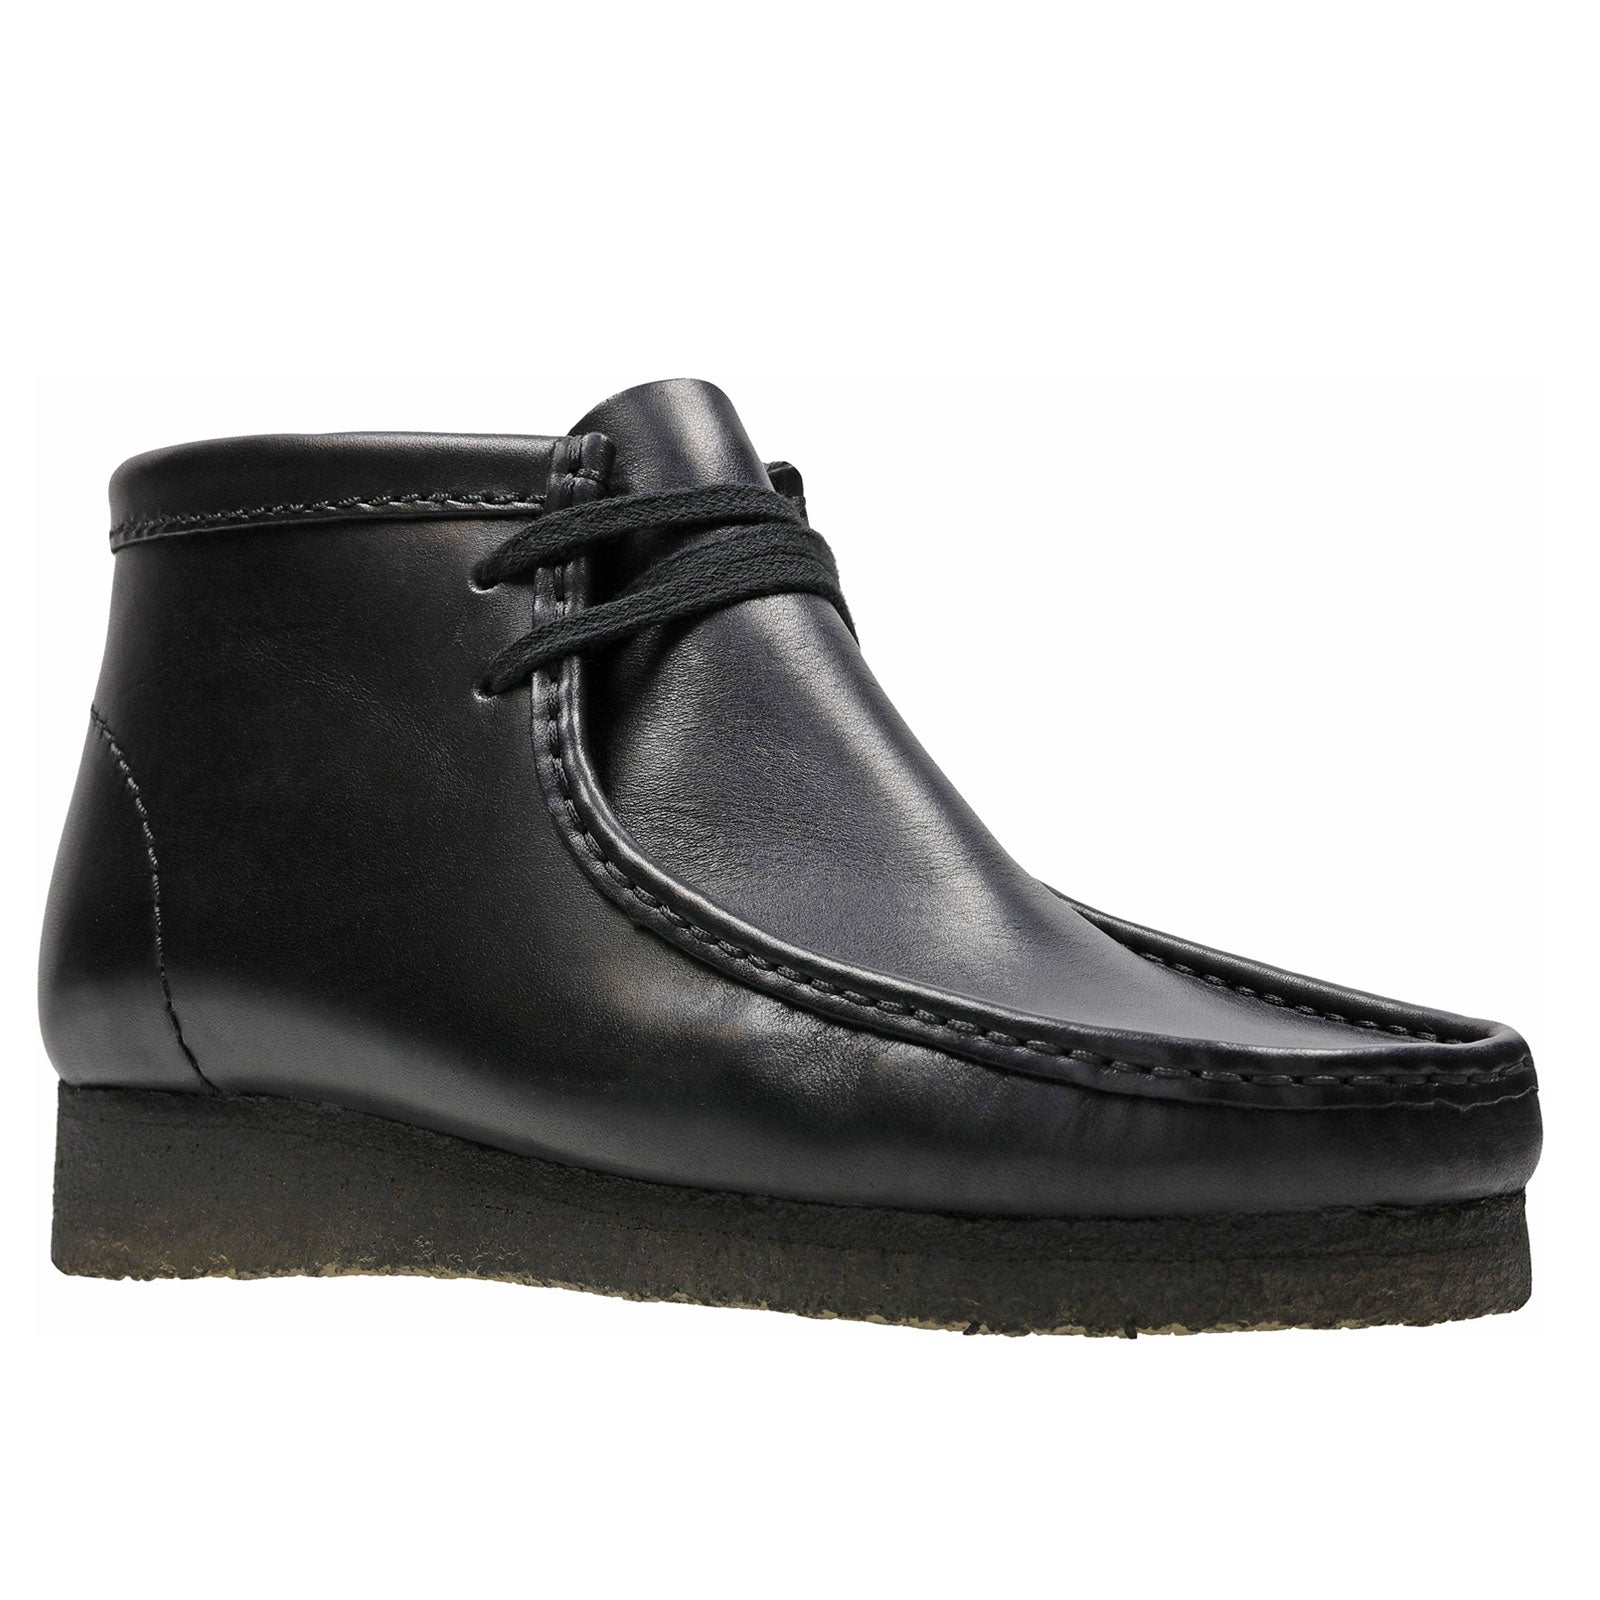 Clarks Wallabee Boot 55512 (Black Leather)